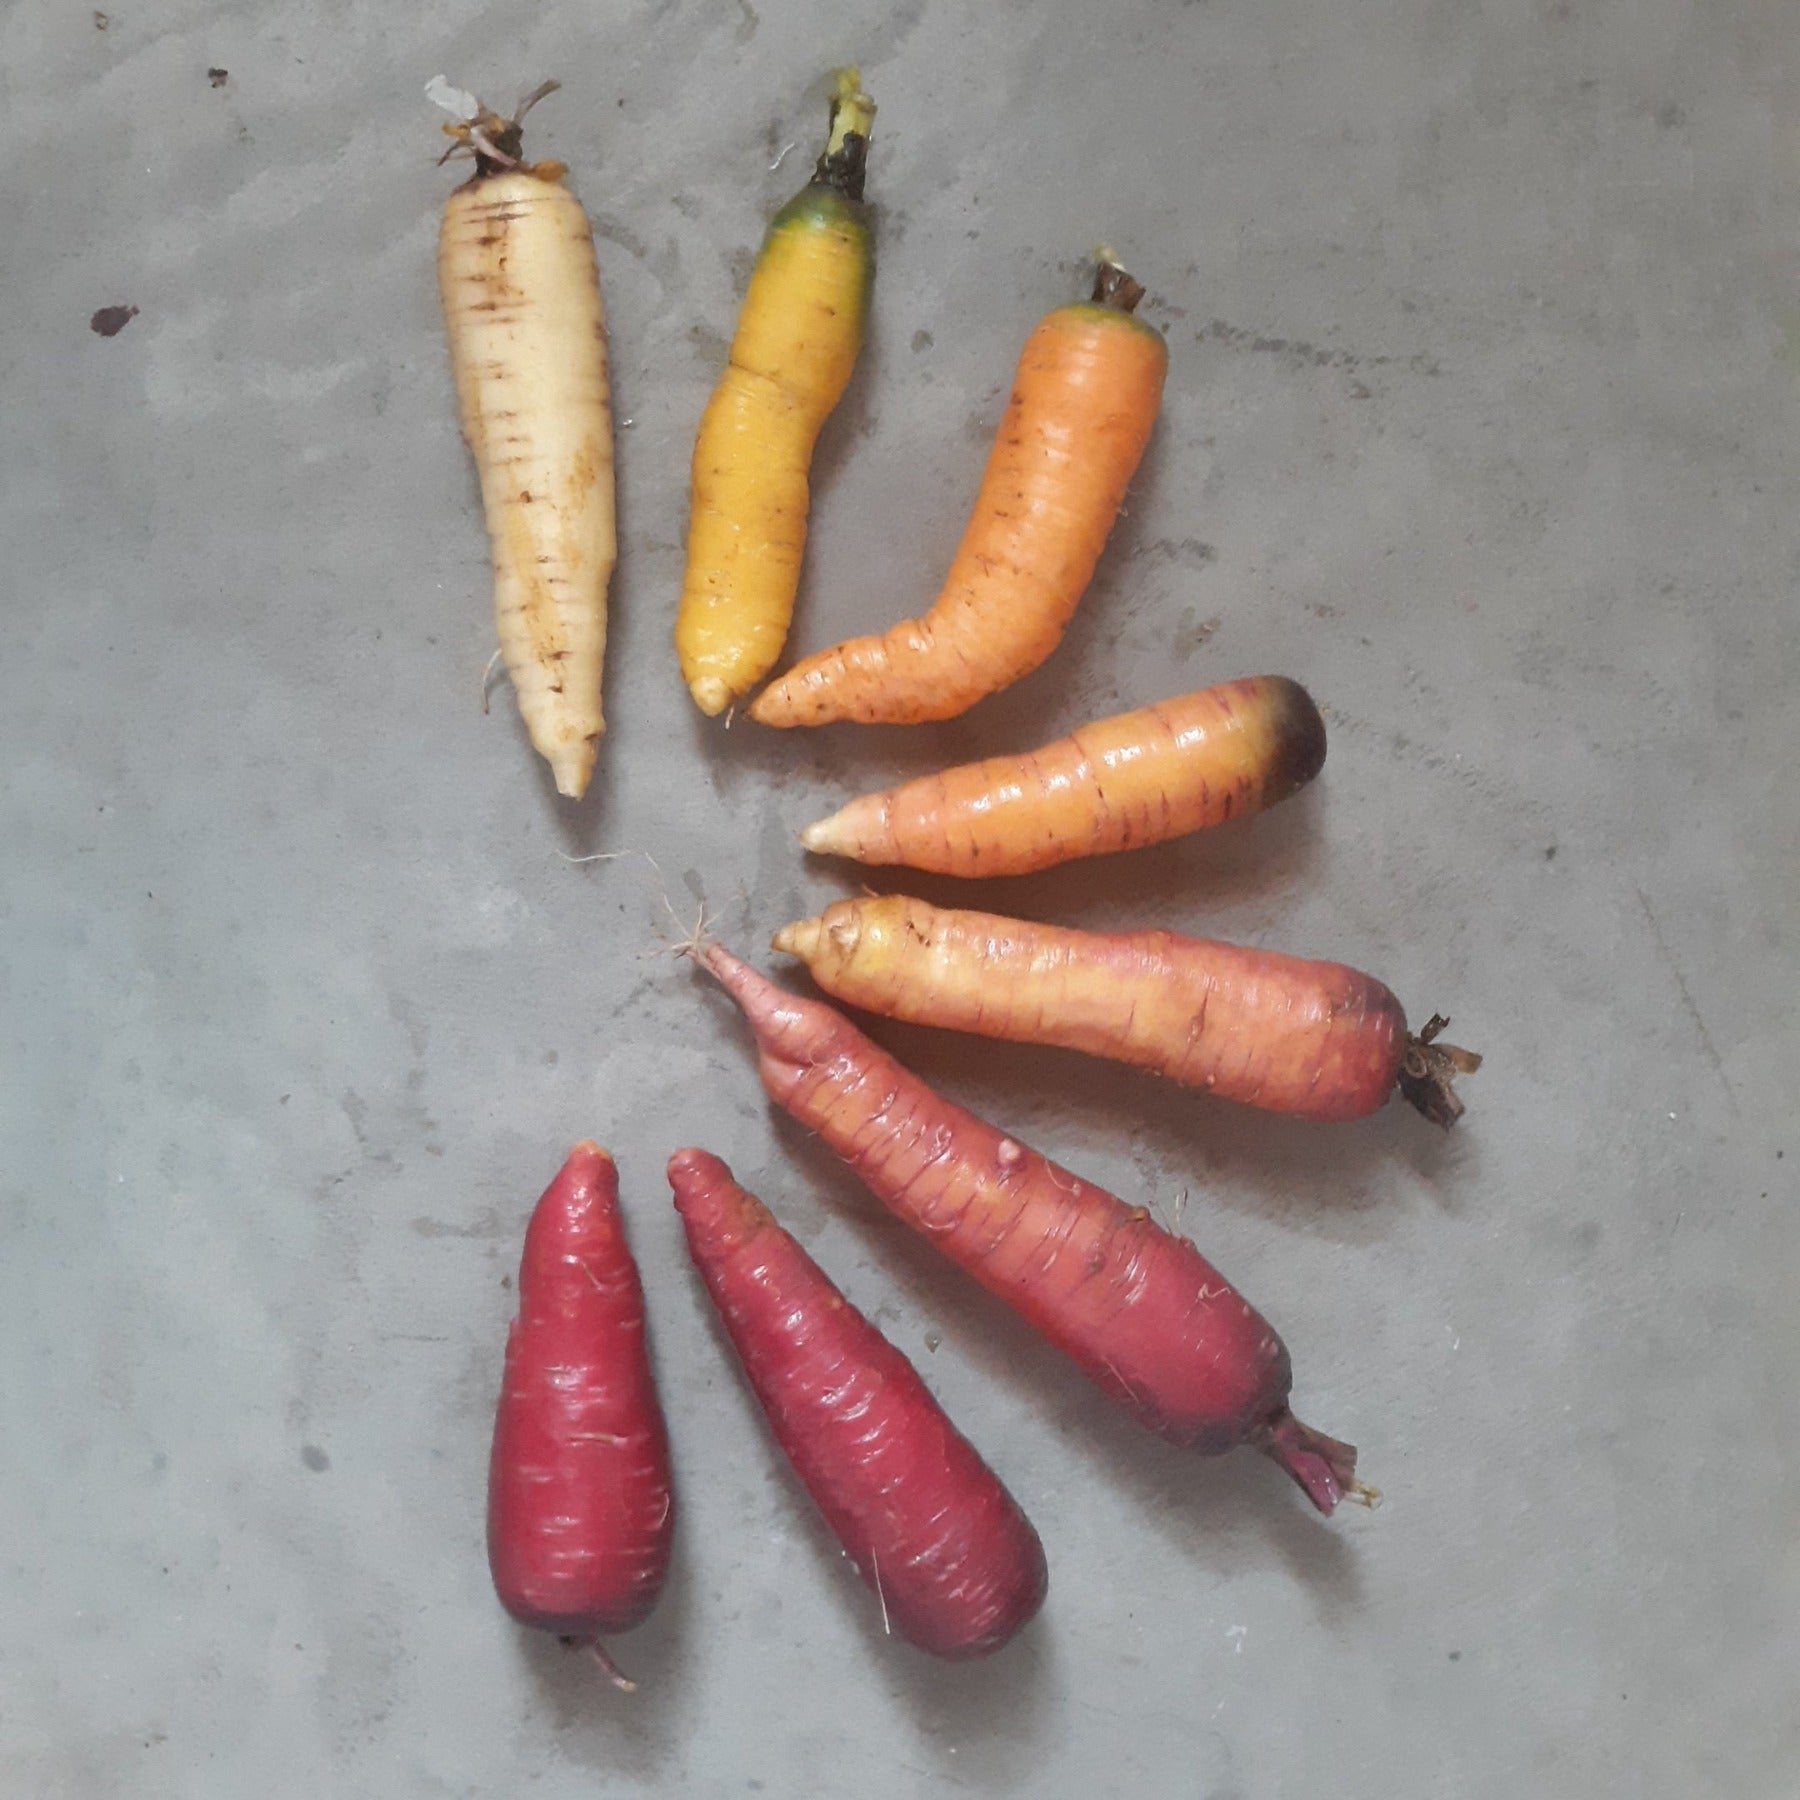 An array of differently colored carrots against a gray background including white, yellow, orange, to deep purple. 